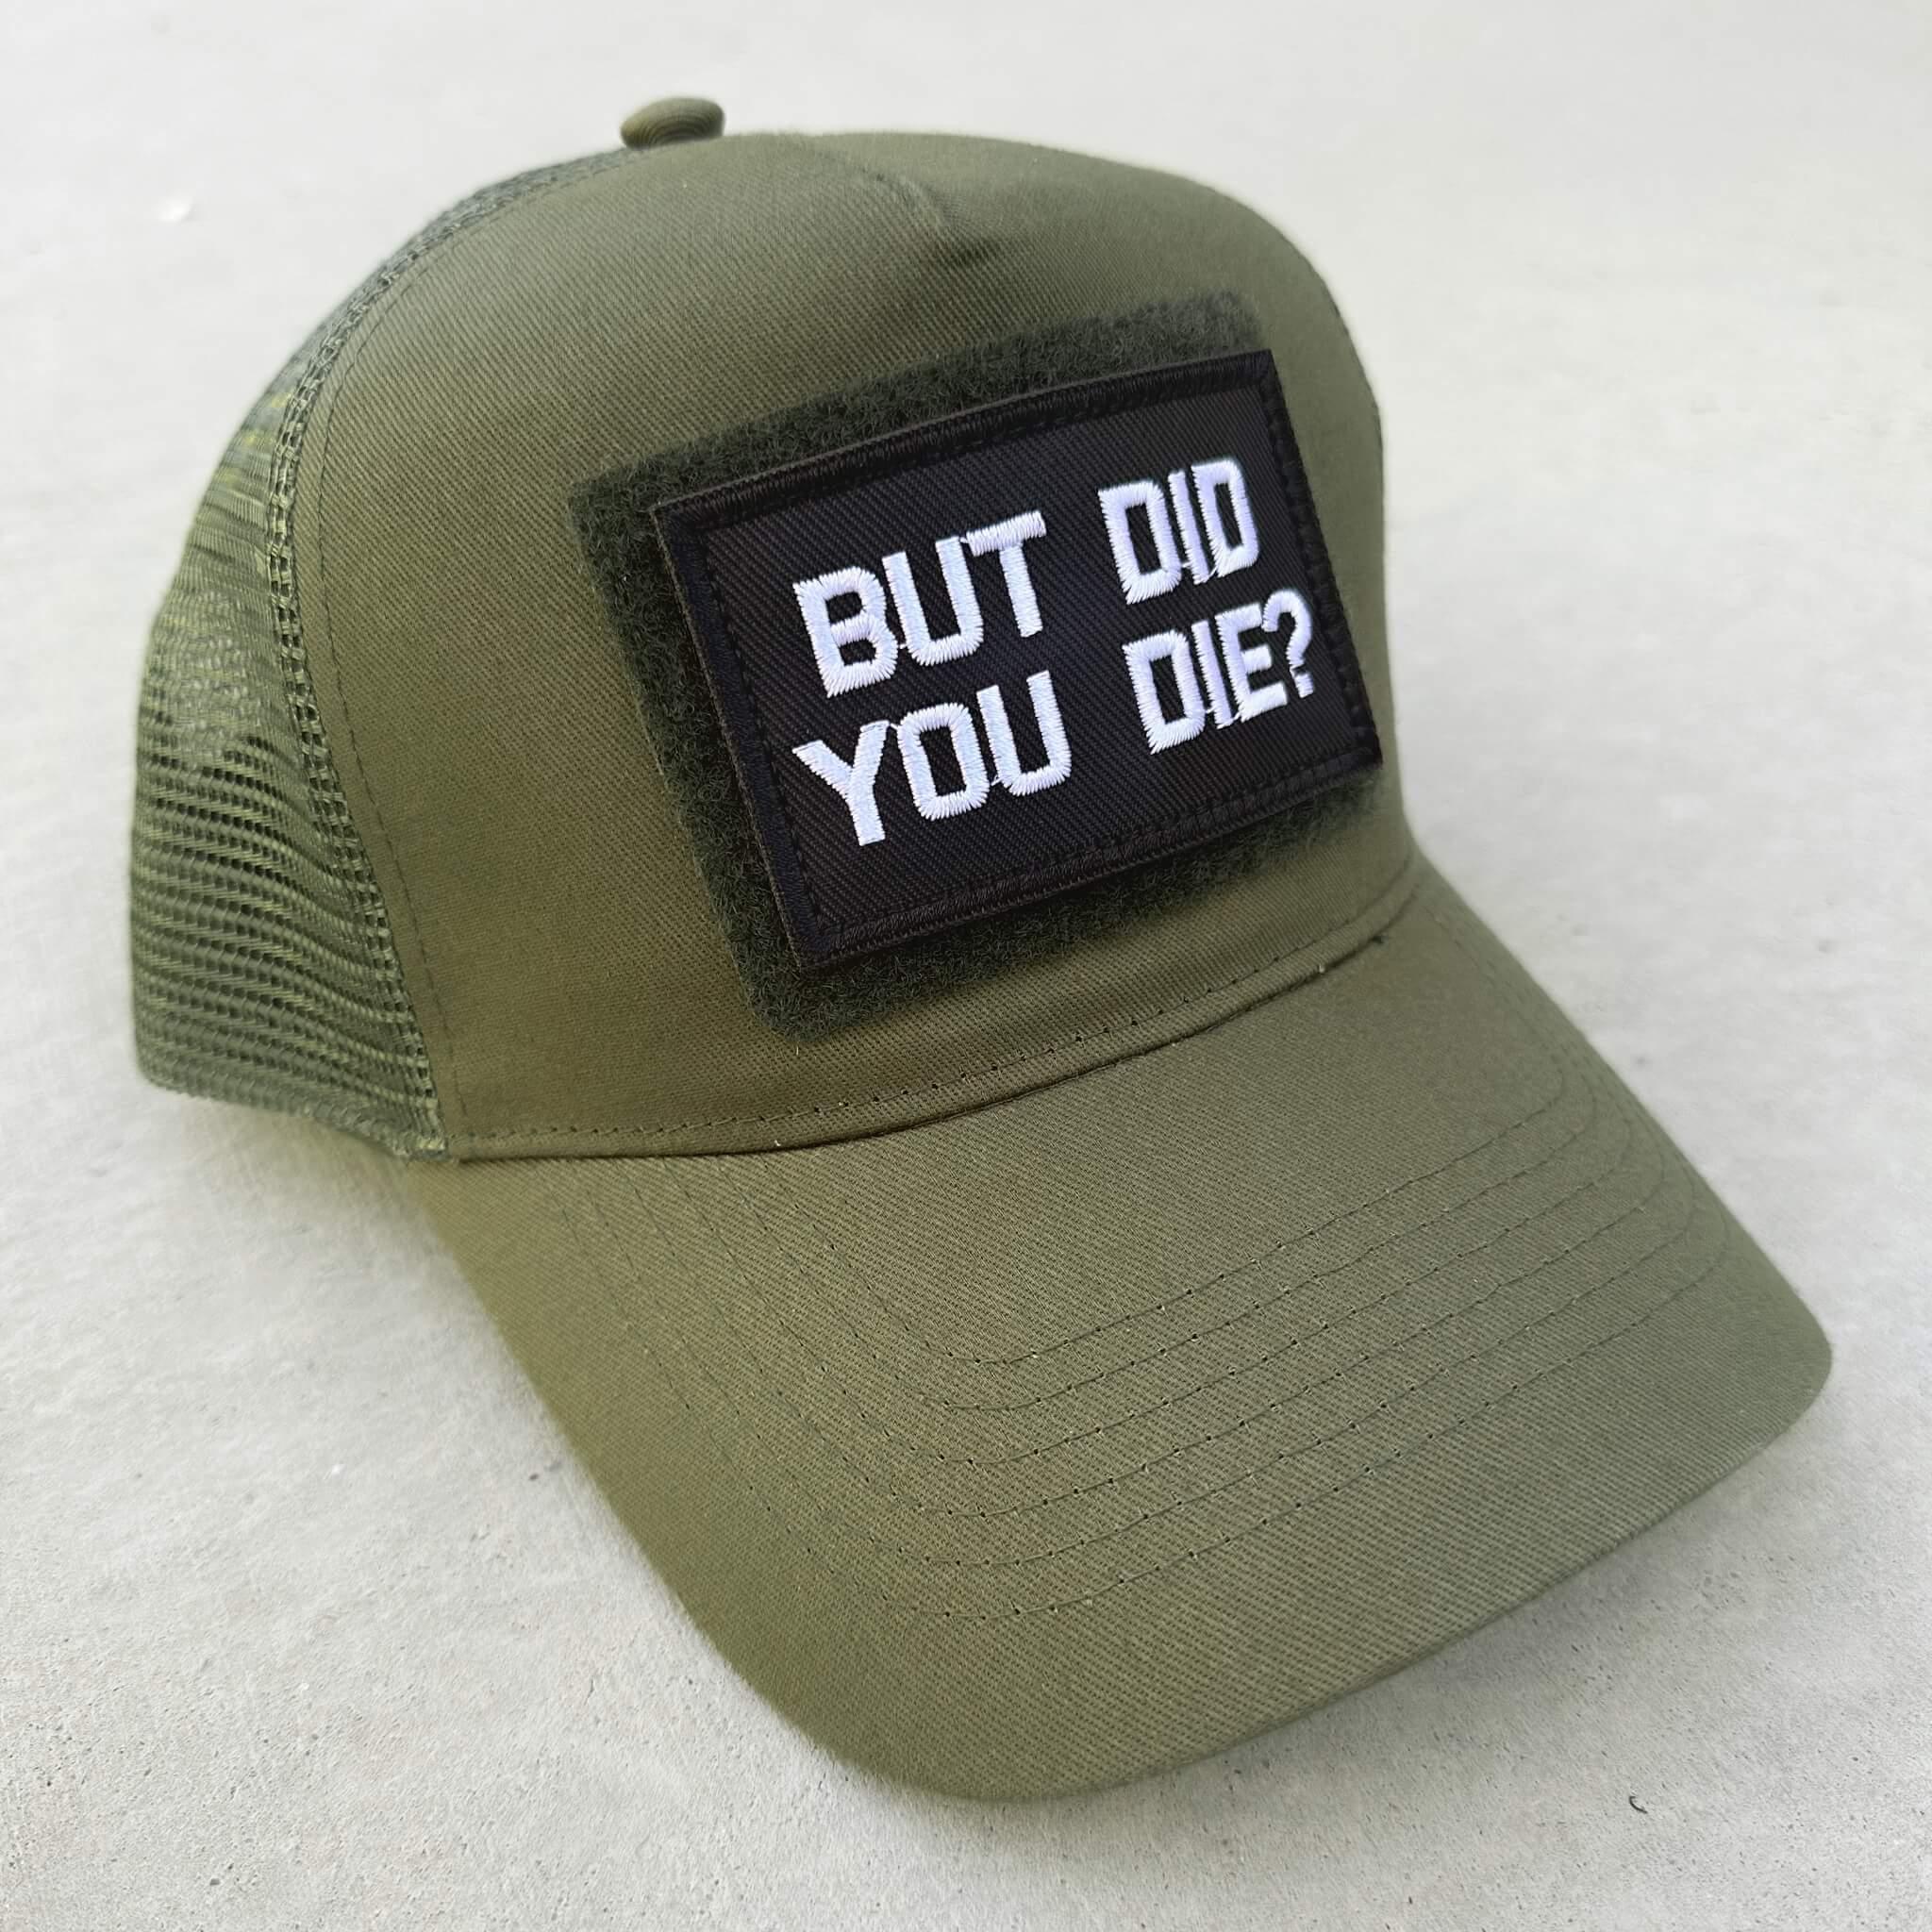 The trucker snapback cap in military green color with But Did You Die patch attached